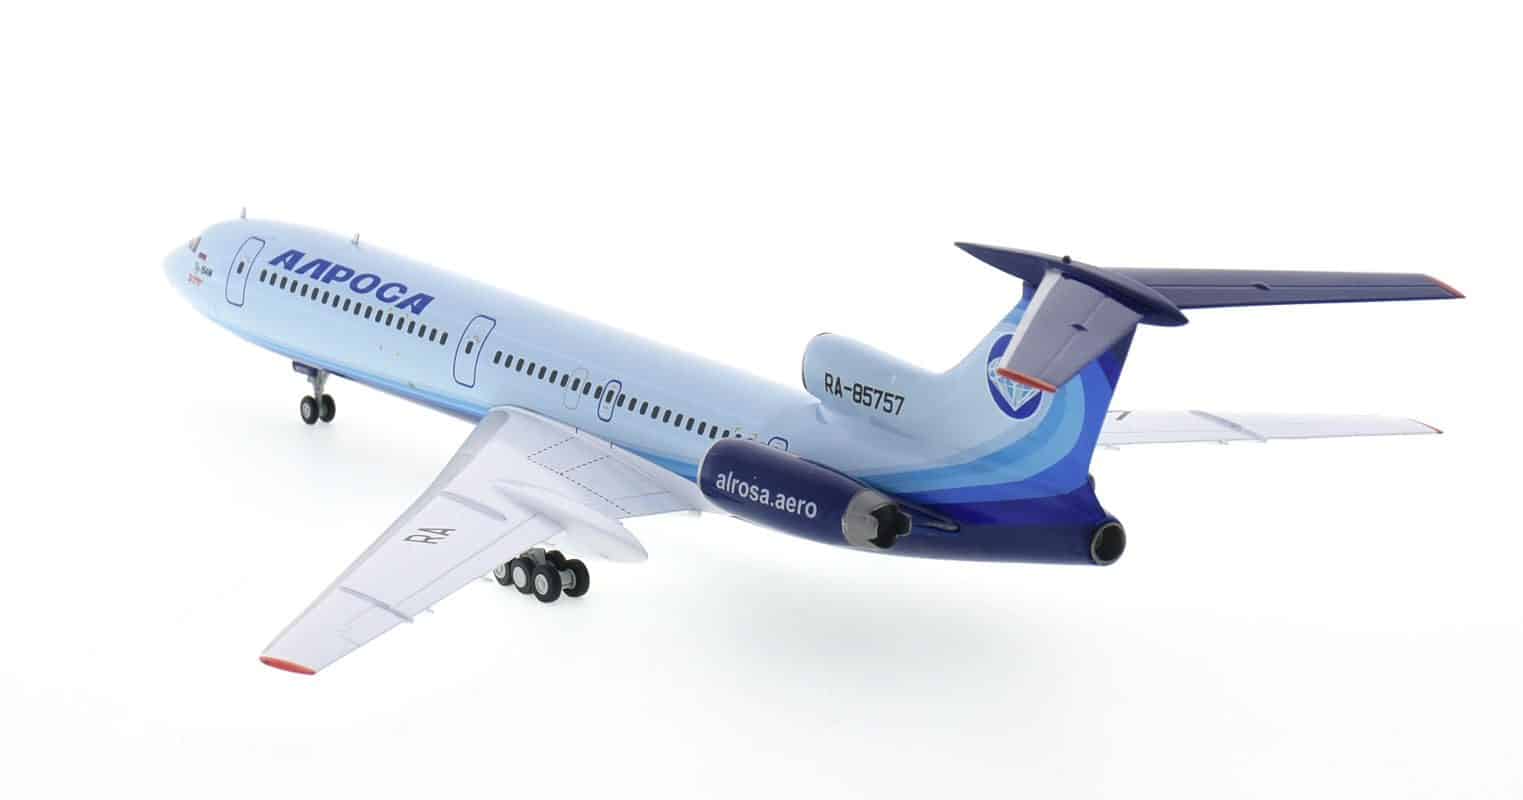 Rear view of Herpa HE571388 - 1/200 scale diecast model of the Tupolev Tu-154M registration RA-85757 in Air Company ALROSA livery, October 2020. This aircraft operated the last commercial flight in Russia of the Tu-154.